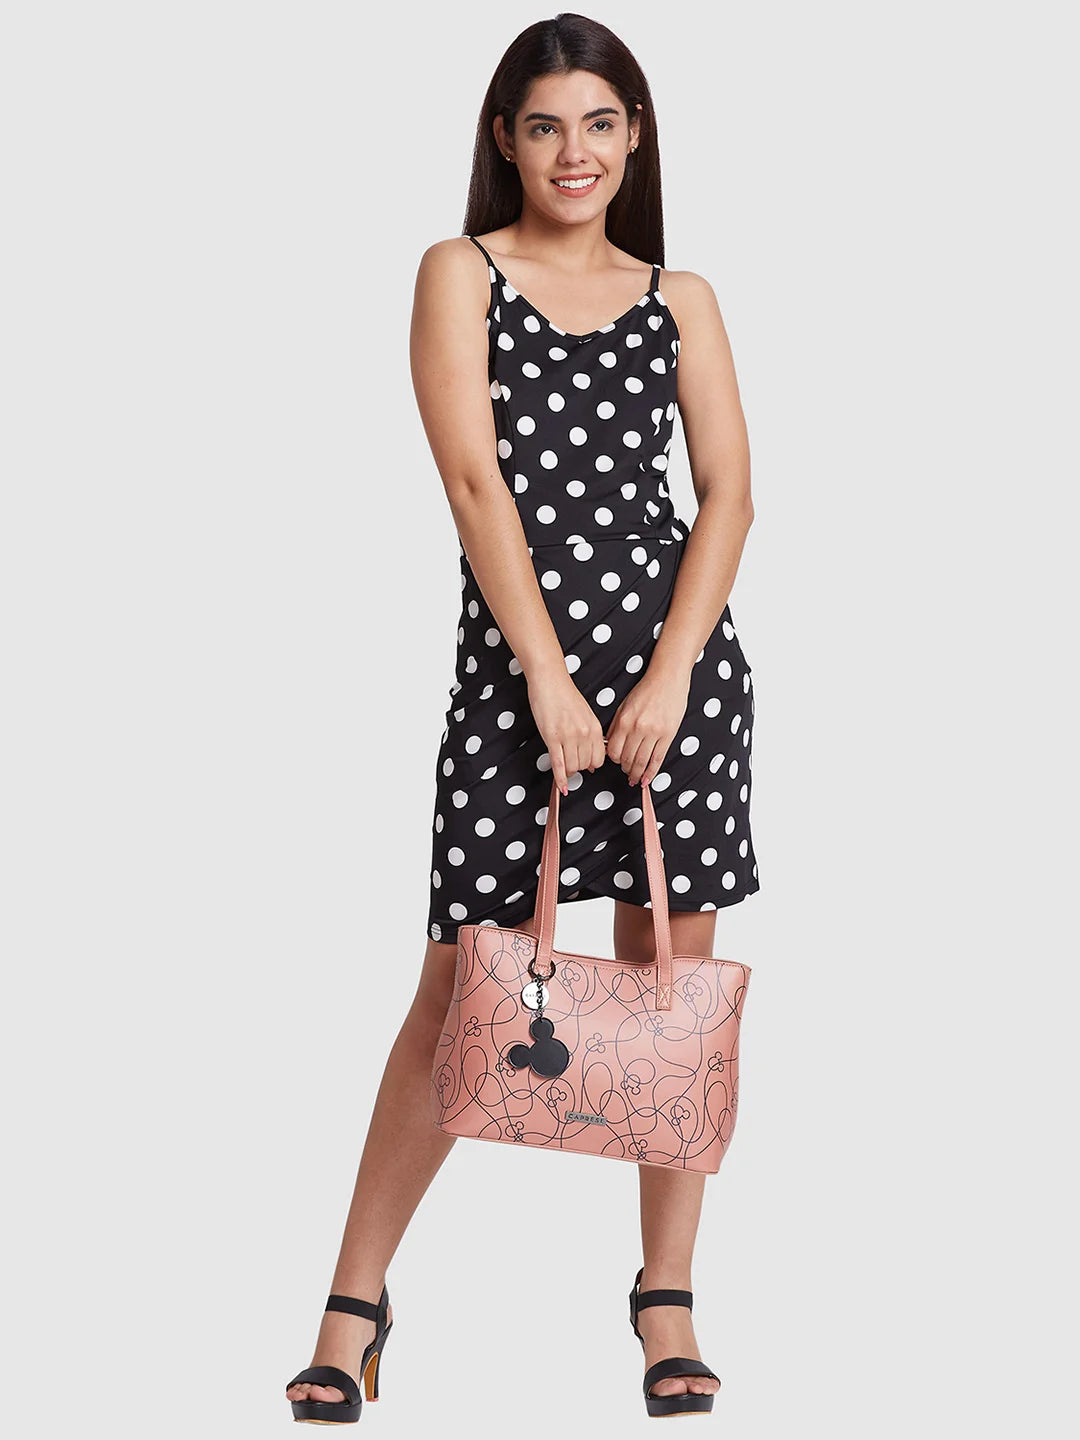 A New Disney x Kate Spade Collection Is Here! — Fashion and Fandom